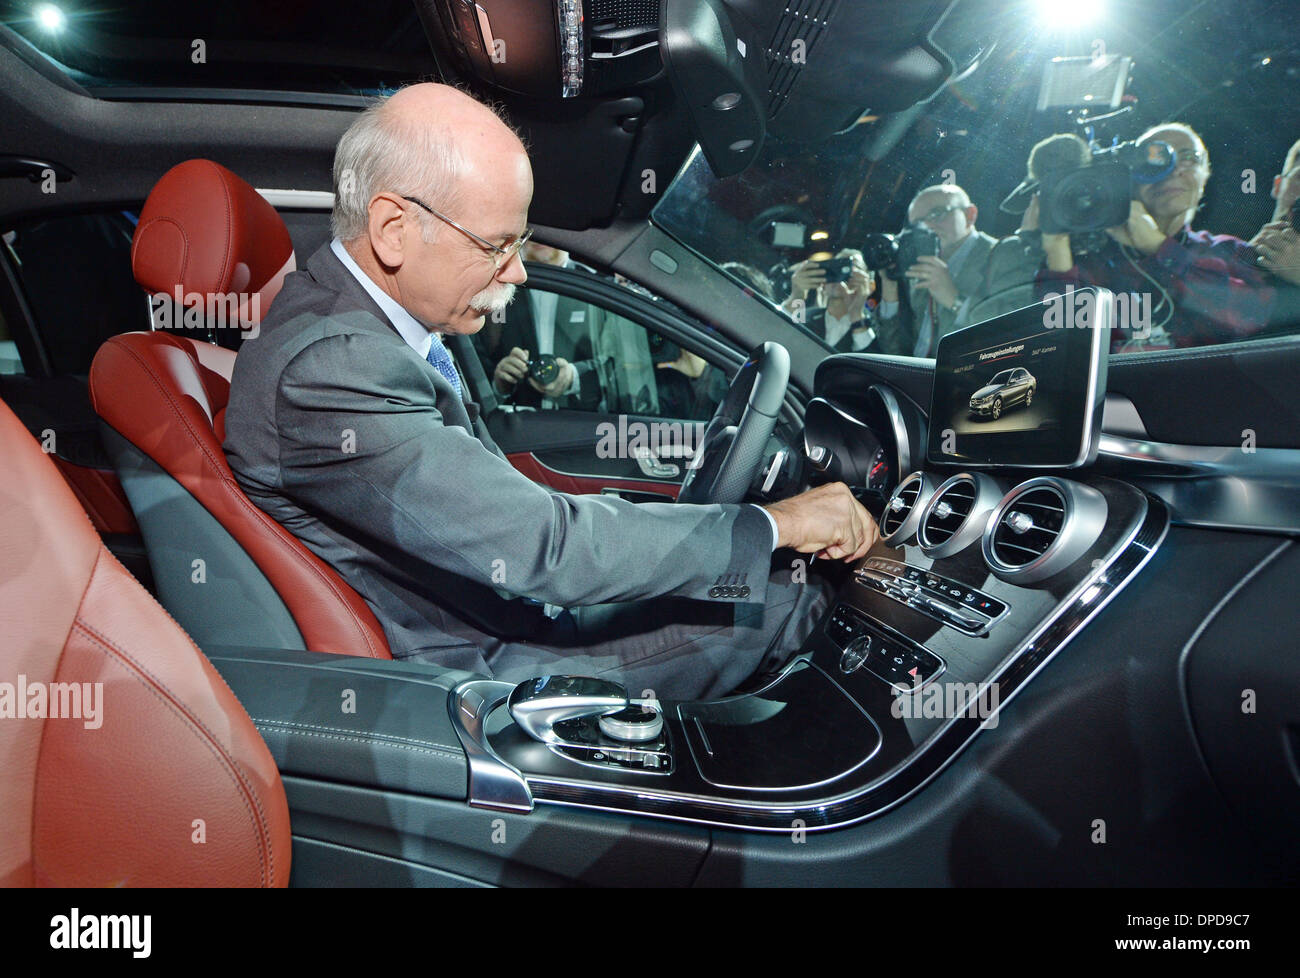 Detroit, Michigan, USA. 12th Jan, 2014. German Dieter Zetsche, Chairman of the Board of Mercedes Benz, sits inside the new Mercedes Benz C-Class car during a media event a day before the North American International Auto Show (NAIAS) start, at the Cobo Center in Detroit, Michigan, USA, 12 January 2014. The North American International Auto Show is one of the largest car shows held each year in the USA and will open to press and dealers on 13 January 2014 and to the public on 18 January 2014 until 26 January 2014. Photo: ULI DECK/dpa/Alamy Live News Stock Photo